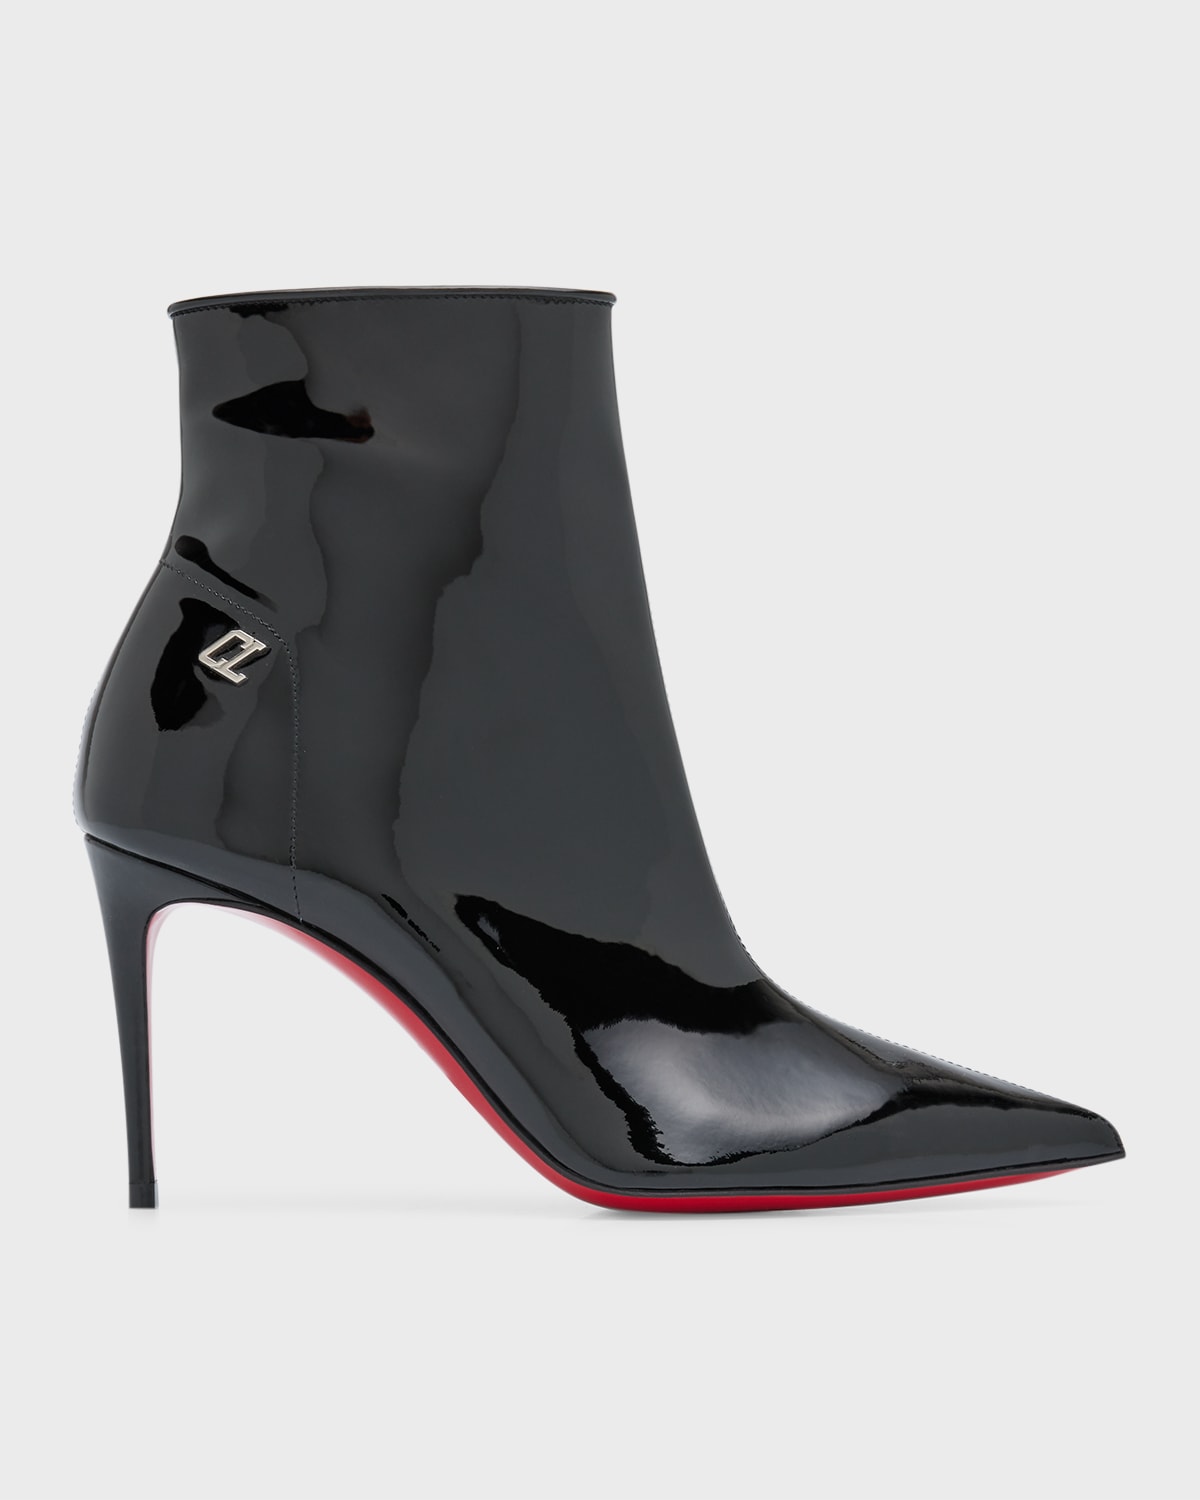 Kate Sporty Patent Red Sole Booties